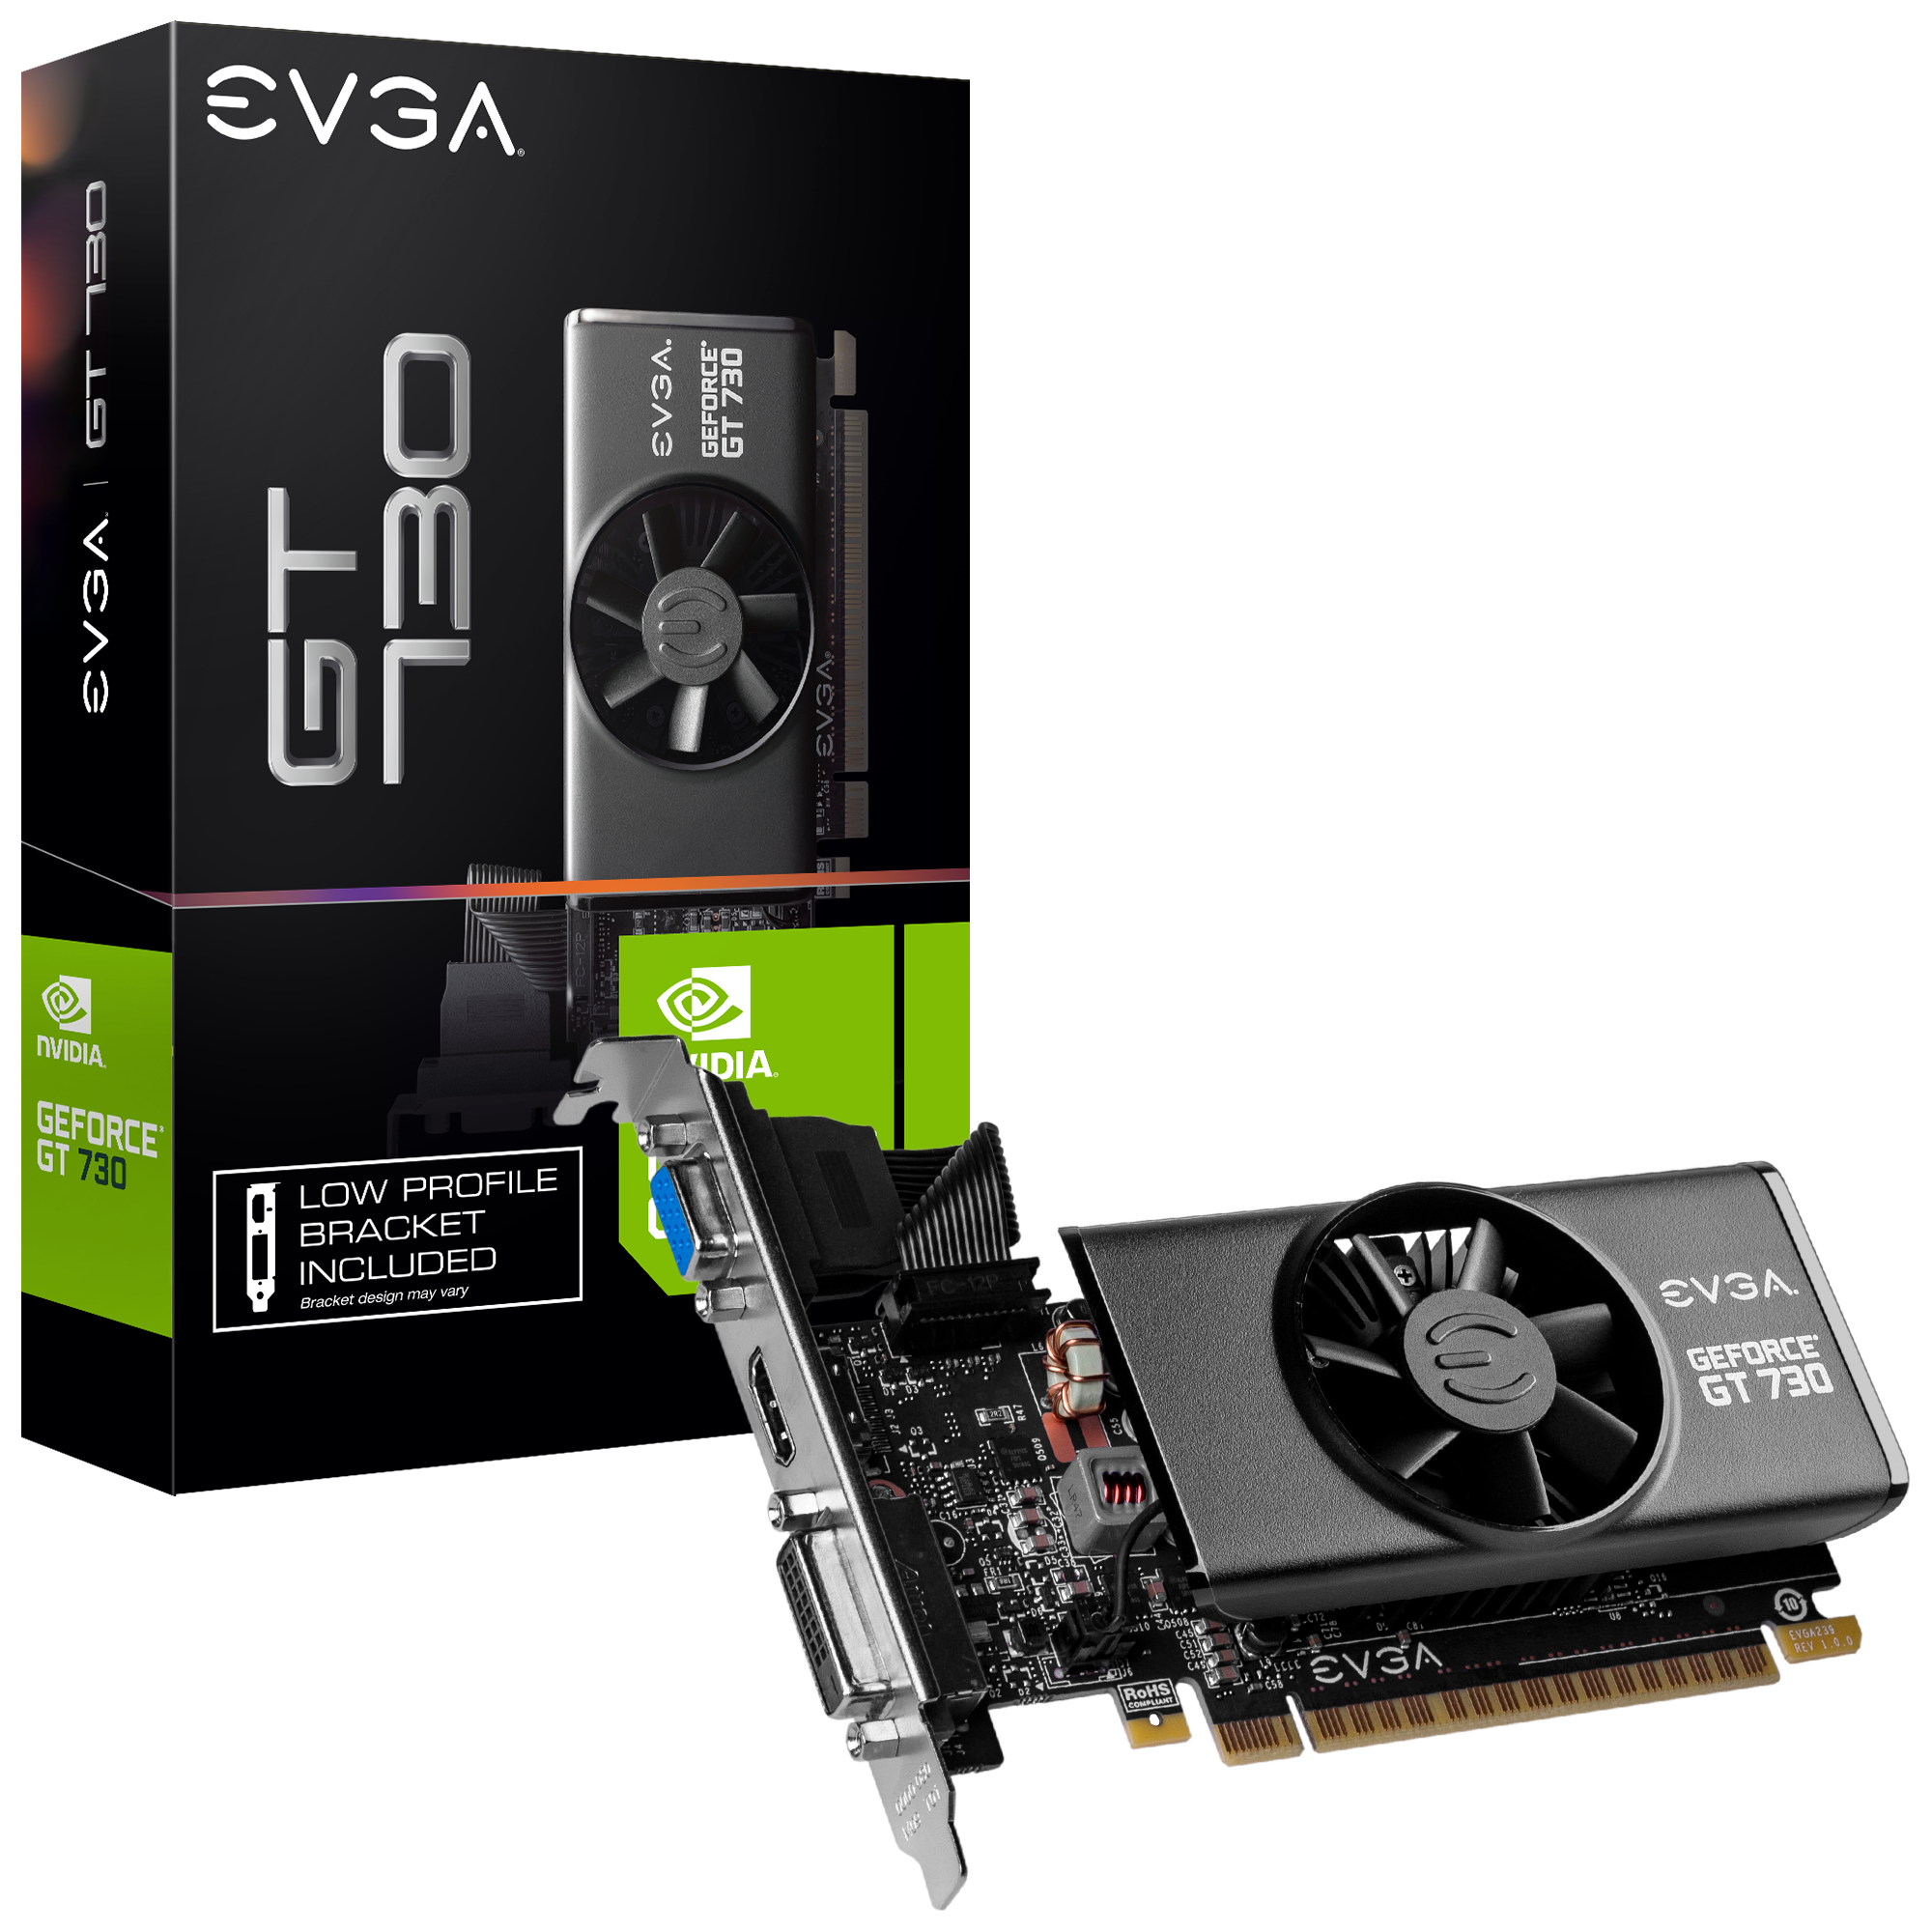 Effectiveness Dairy products law EVGA - Products - EVGA GeForce GT 730 2GB (Low Profile) - 02G-P3-3733-KR